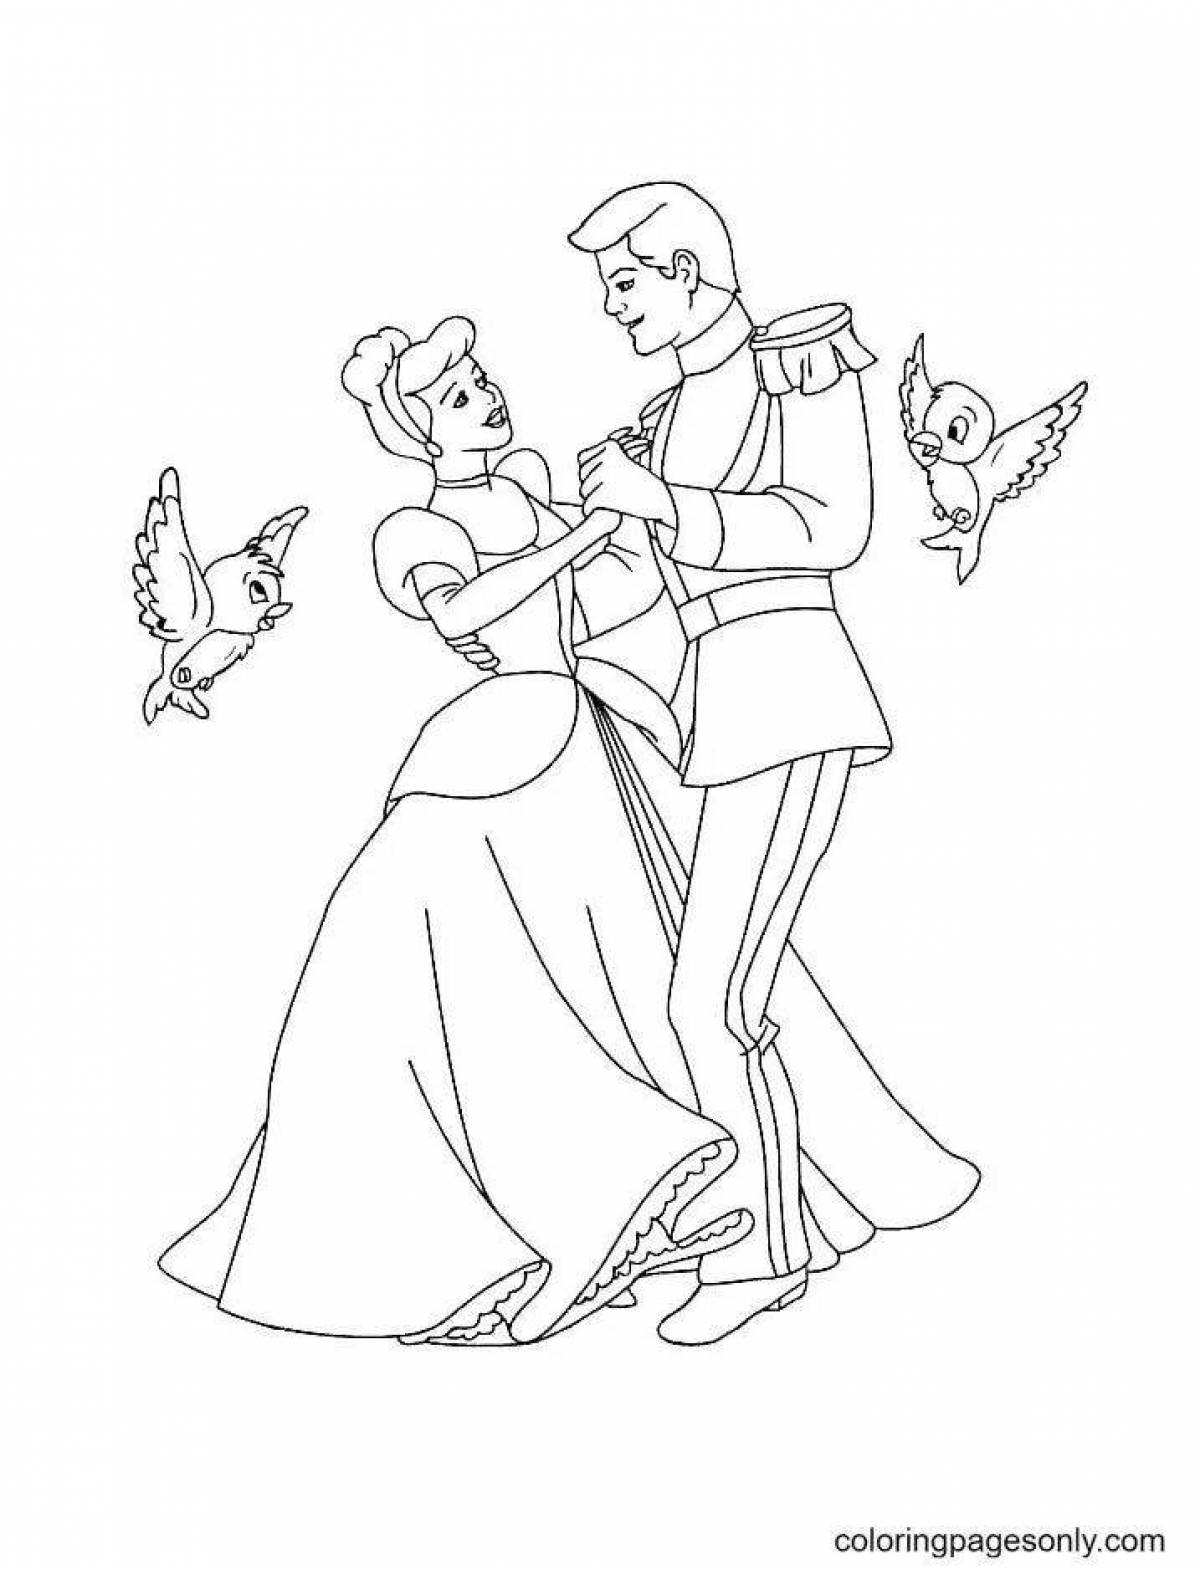 Great princess and prince coloring pages for kids